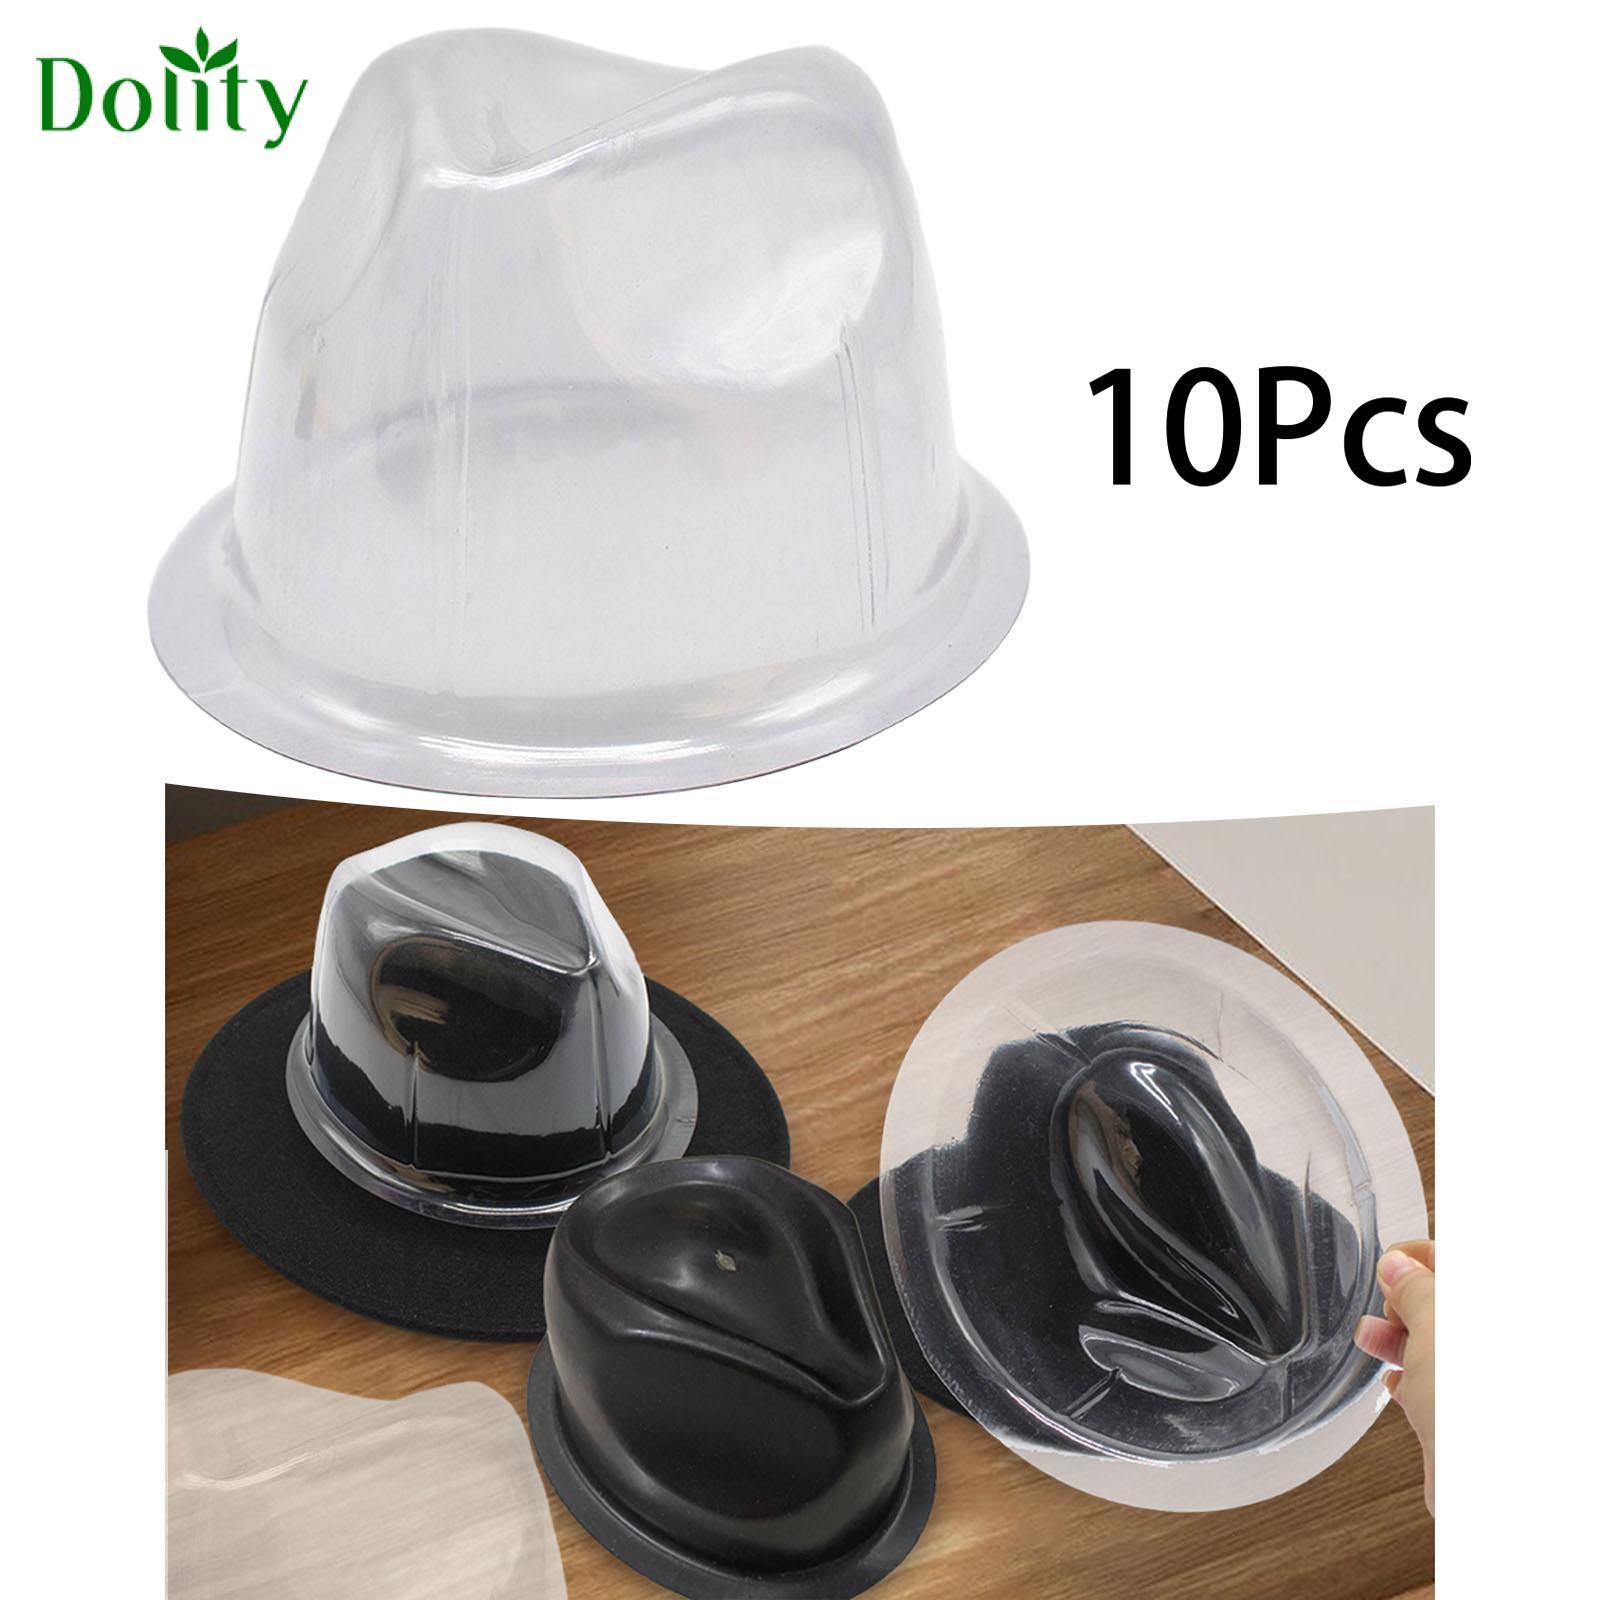 Dolity 10Pcs Jazz Hat Stand Hat Support Holders Supplies Travel Caps